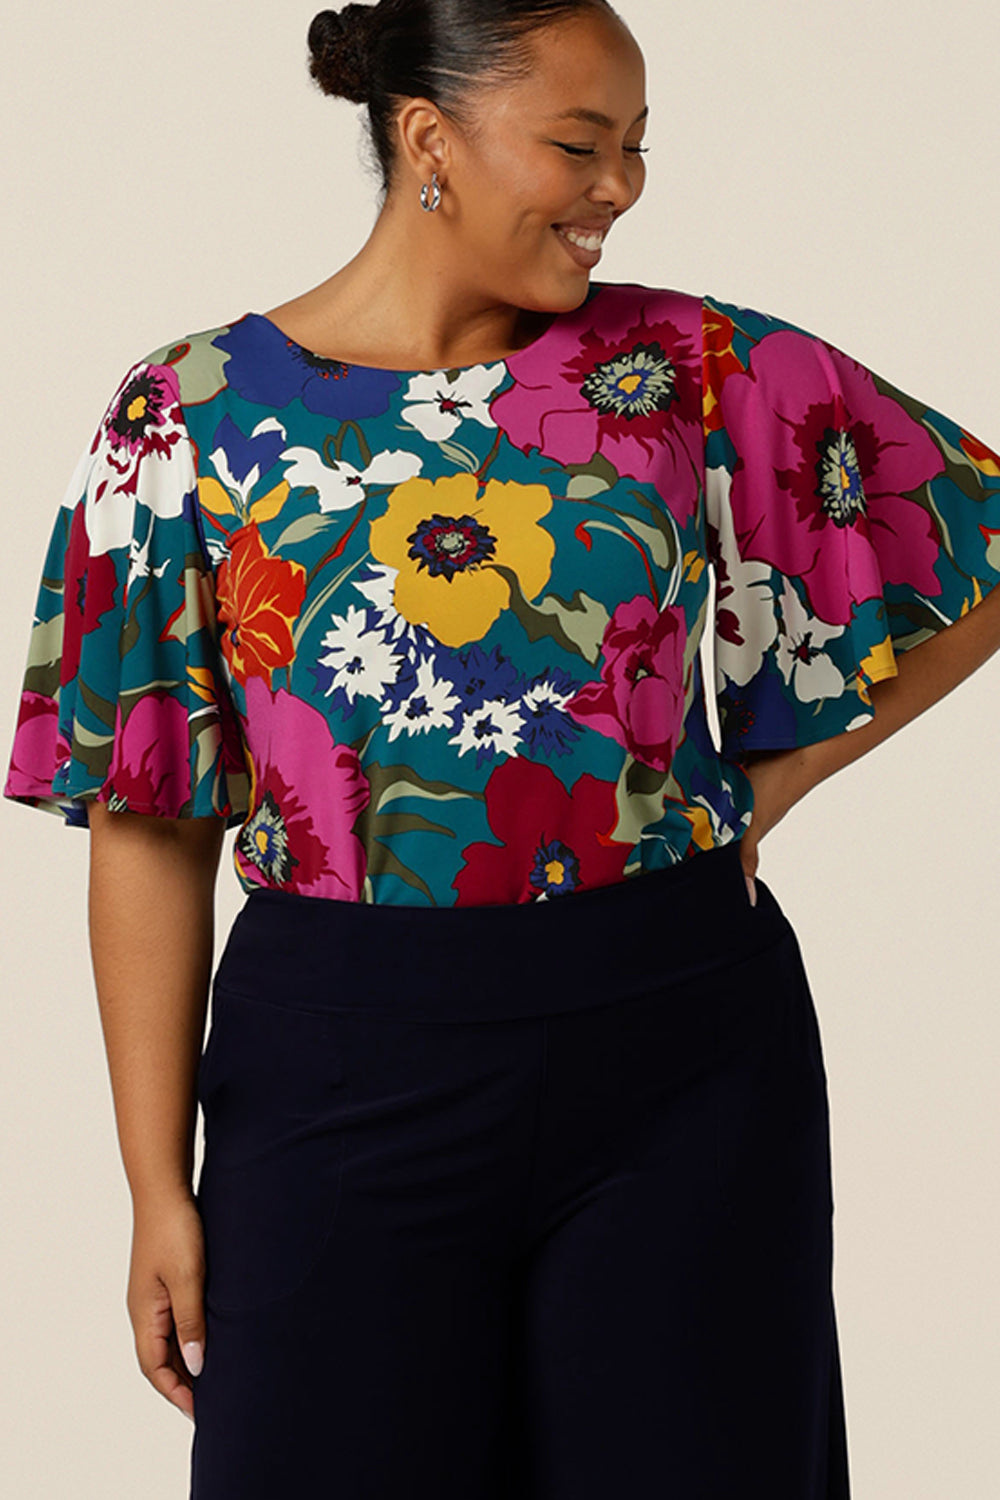 A fuller figure, size 18 woman wears a round neck jersey top with wide flutter sleeves. Made in Australia, this quality workwear top gives feminine style to corporate pants and skirts. Available in an inclusive 8-24 size range.